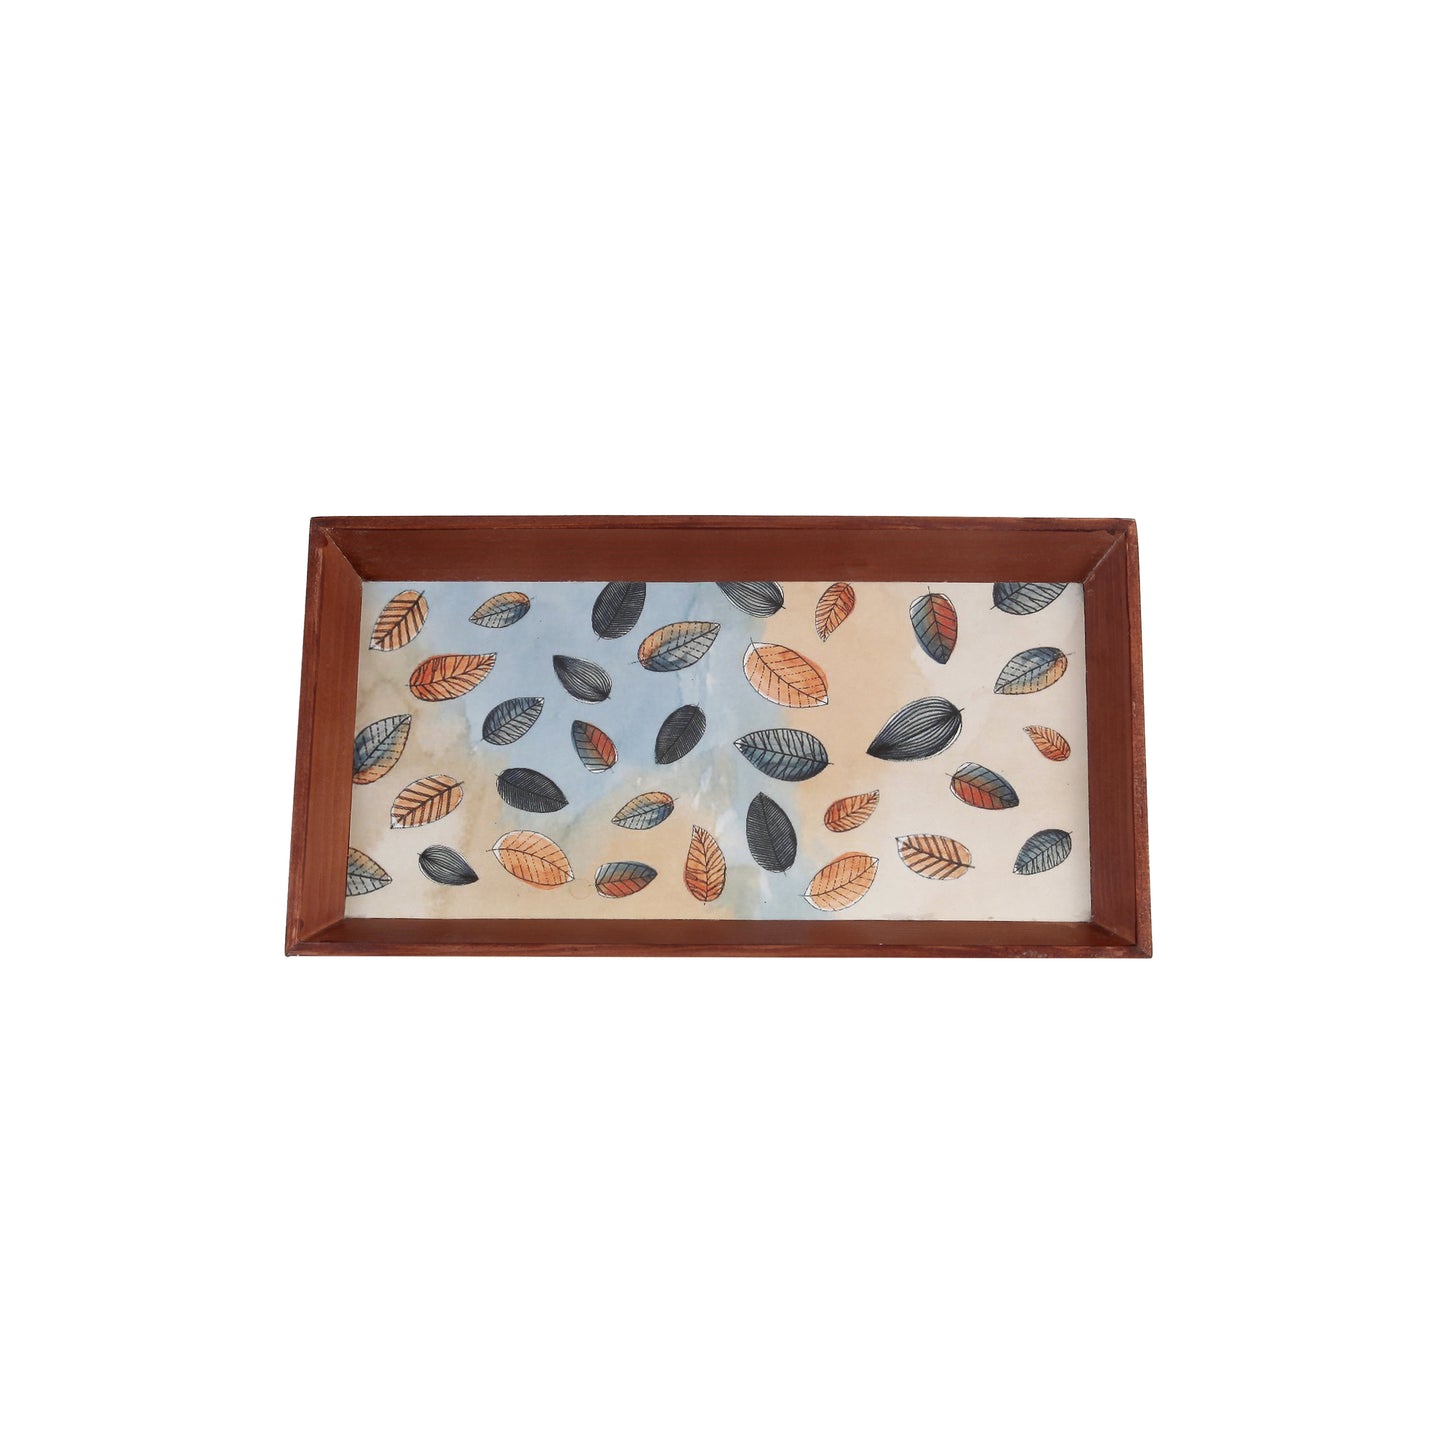 A Tiny Mistake Fall Leaves Rectangle Wooden Serving Tray, 35 x 20 x 2 cm